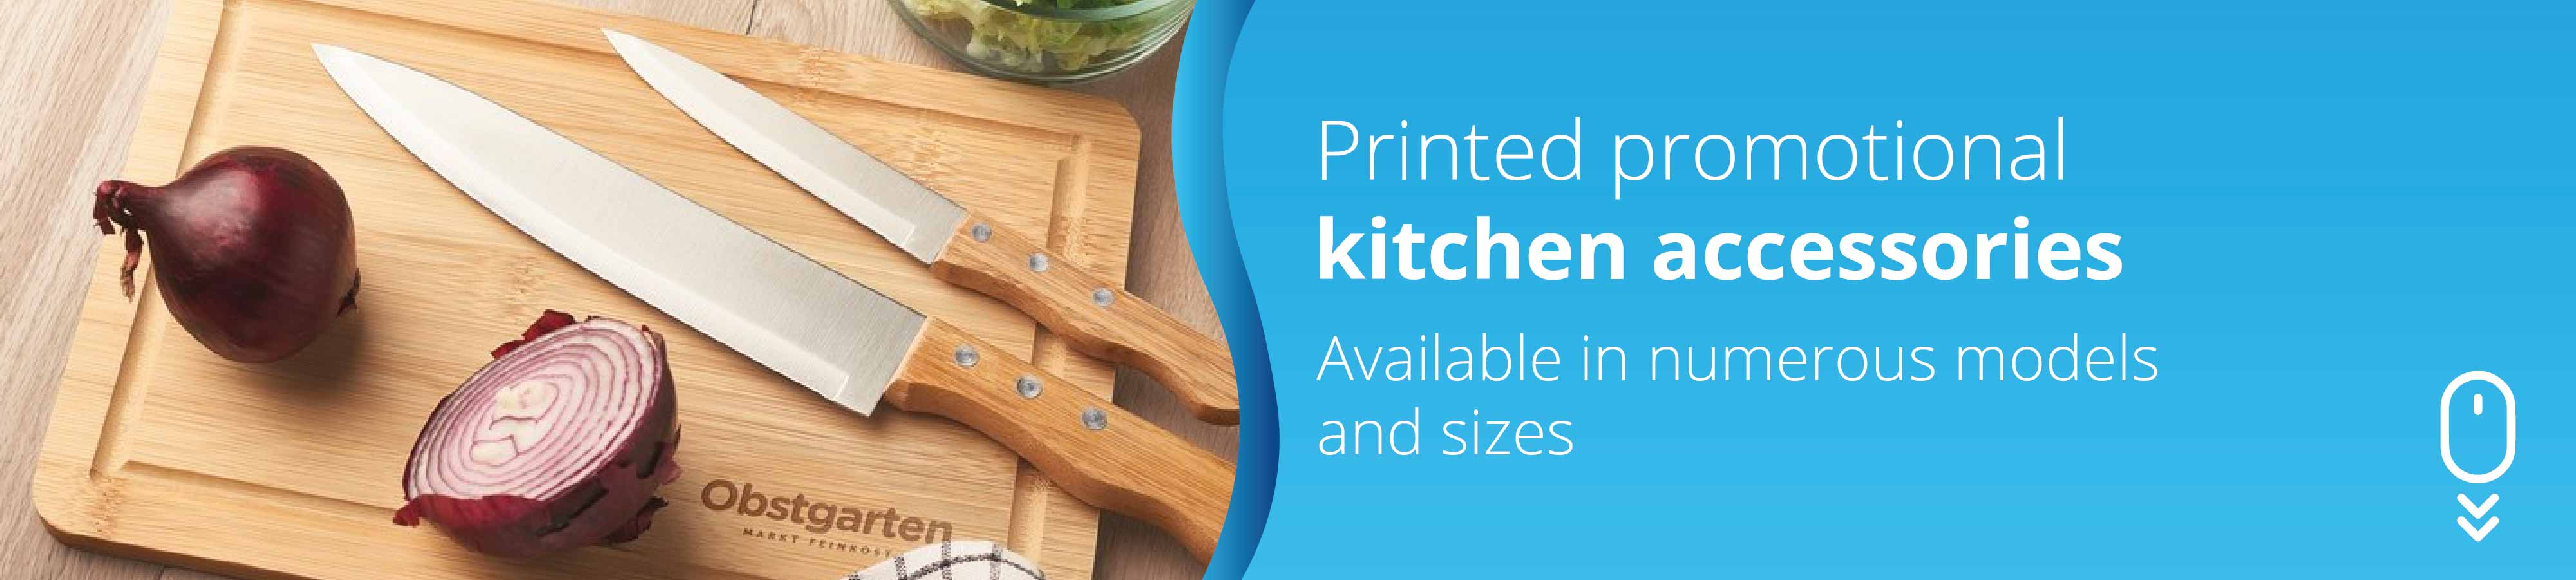 printed-promotional-kitchen-accessories